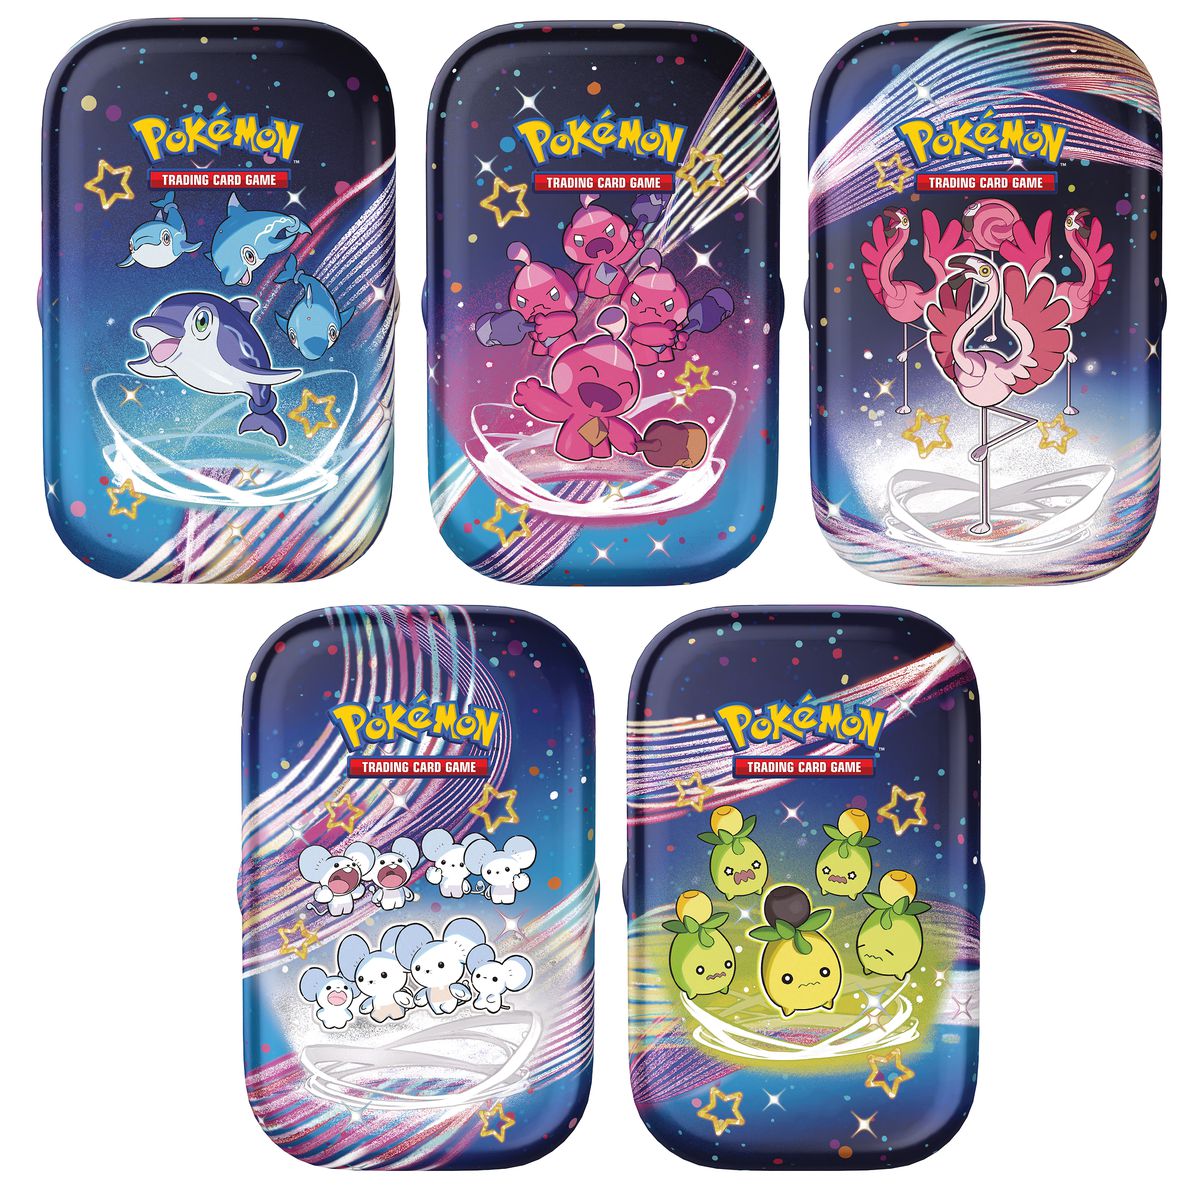 Pokémon TCG Scarlet and Violet — Paldean Fates mini tins with Tinkatink, Flamigo, Smoliv, Maushold, and Palafin on them.